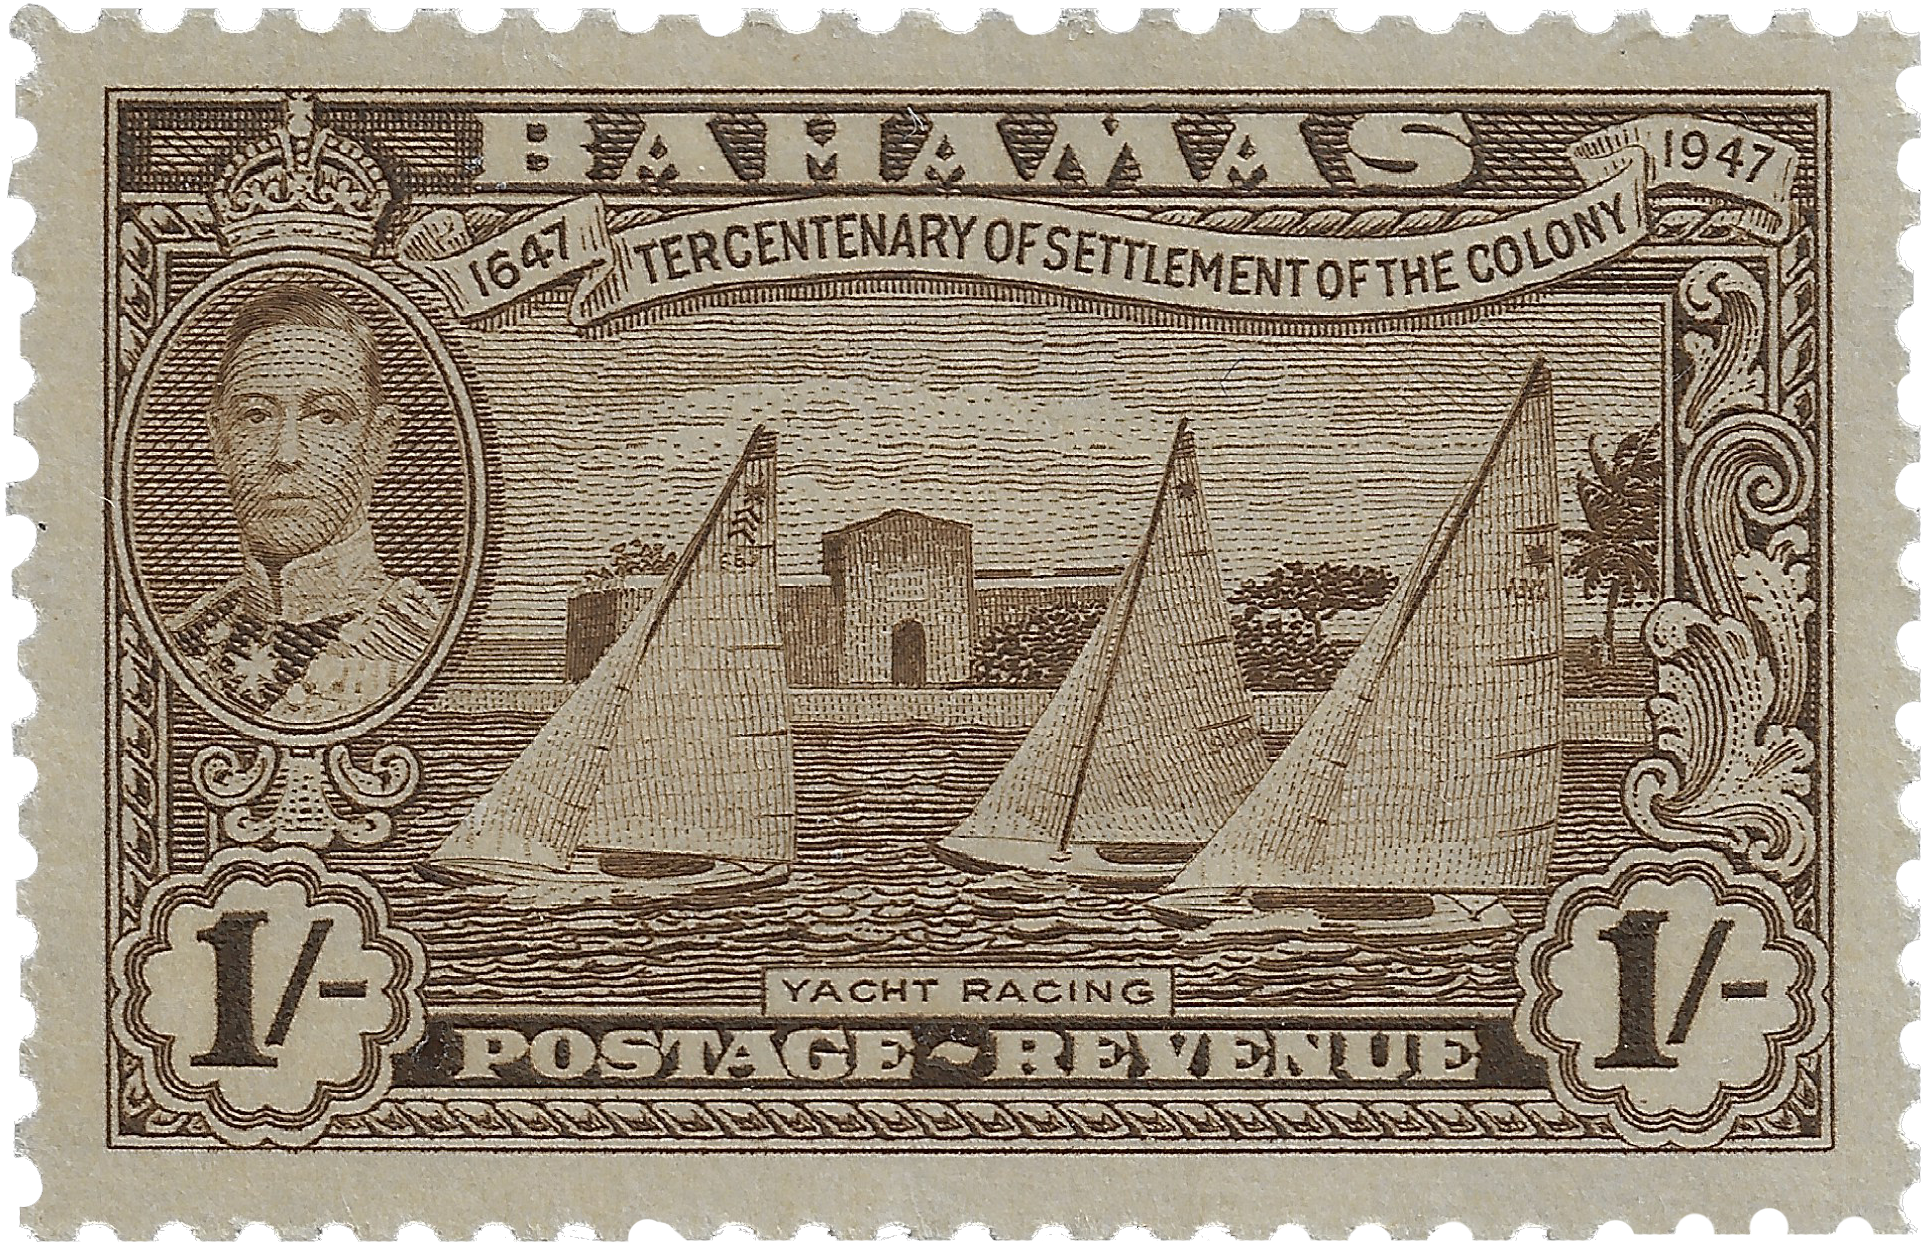 1s 1948, 1647 Tercentenary of Settlement of the Colony, Yacht Racing